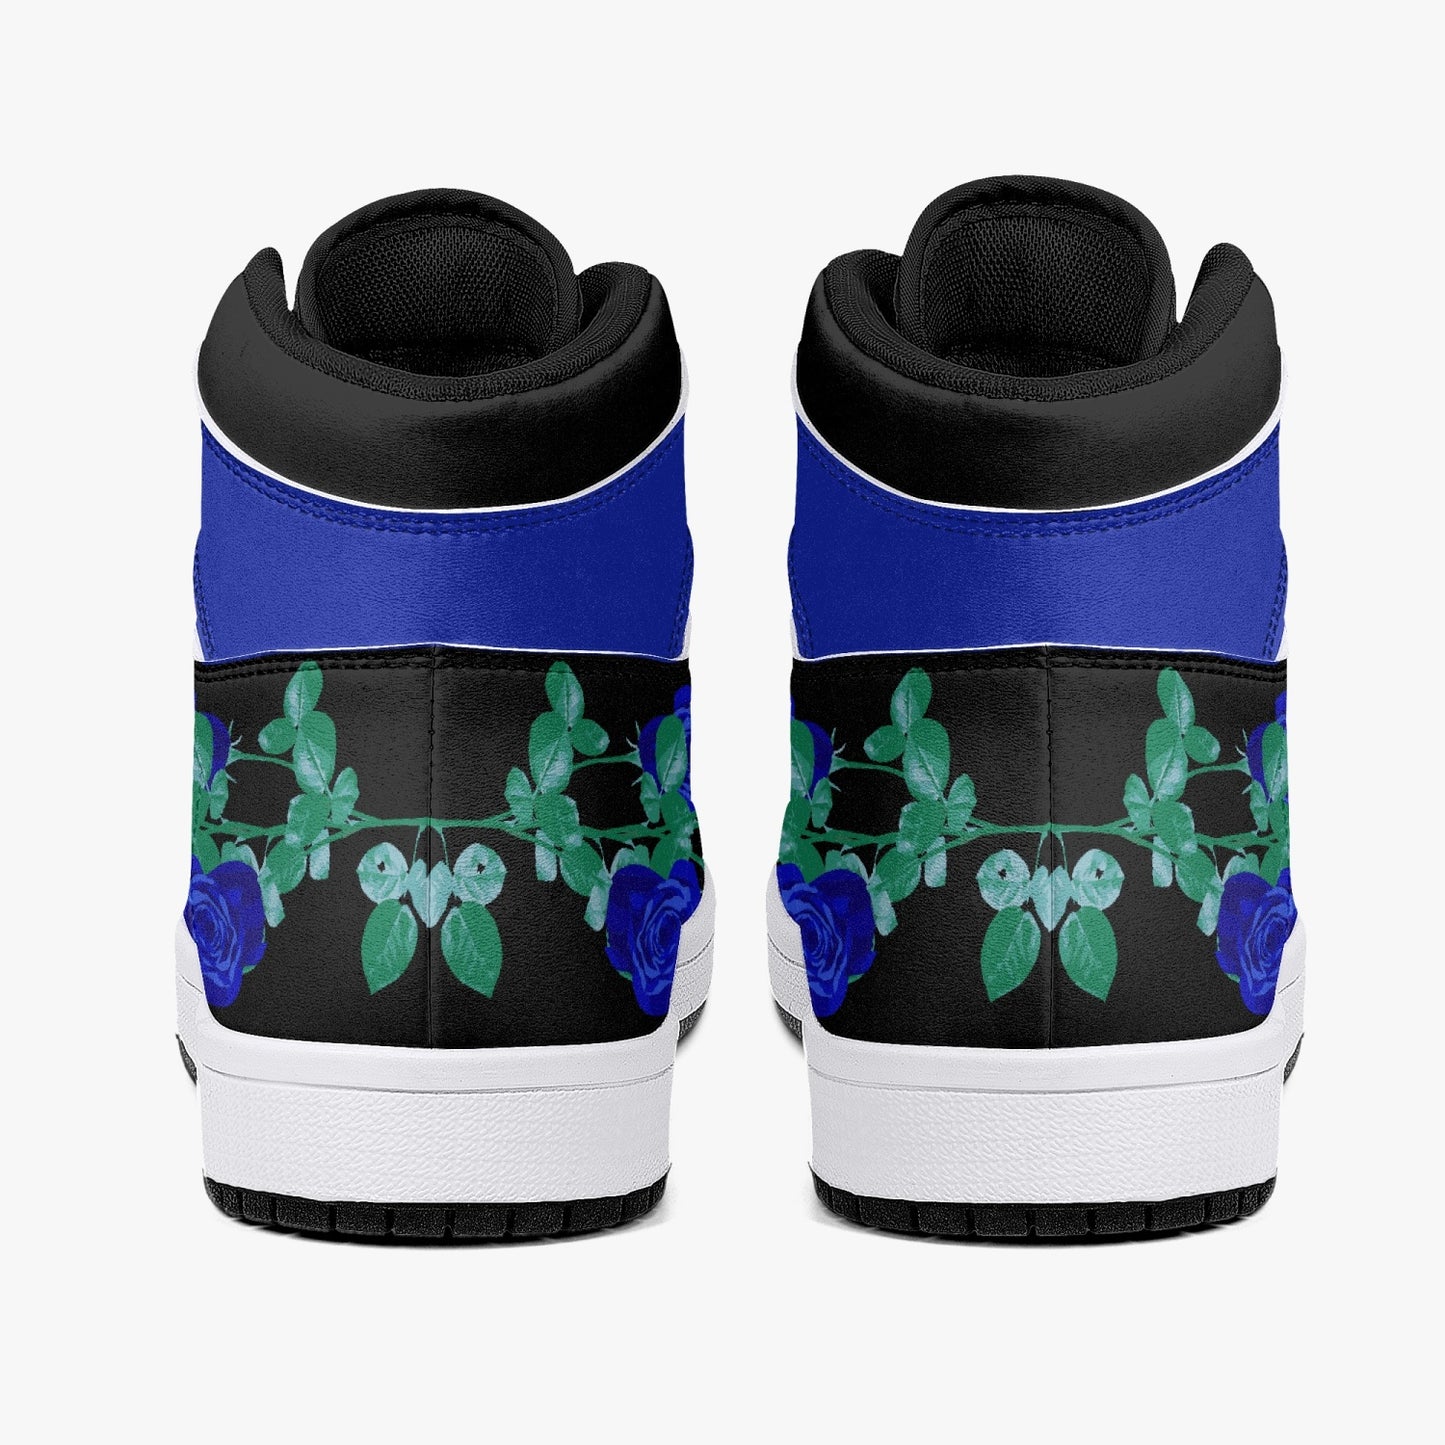 The Blue Rose High-Top Leather Sneakers